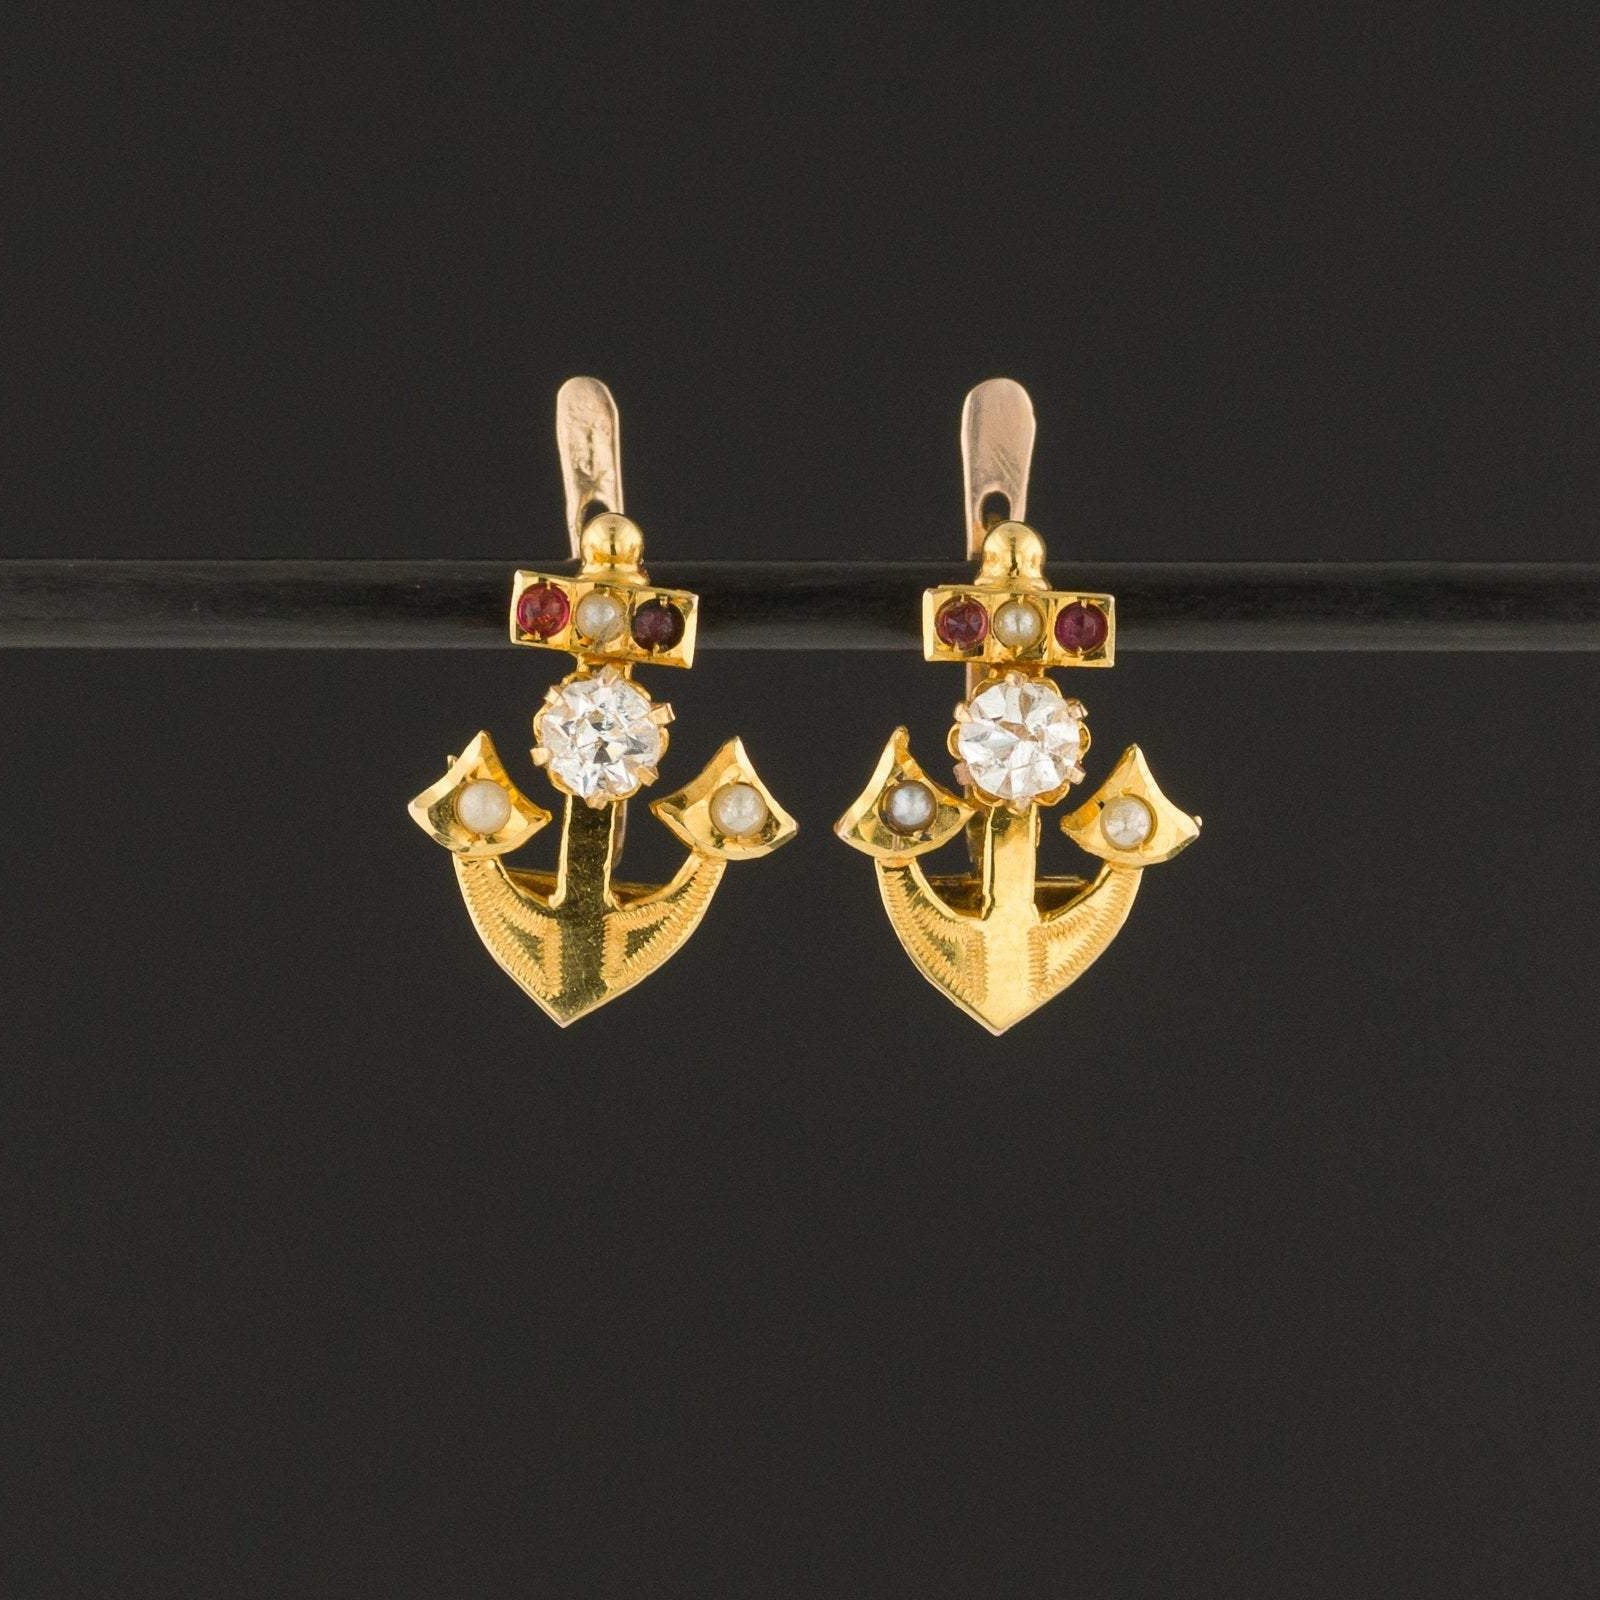 Antique Anchor Earrings | 14k Gold Anchor Earrings with Paste Accents | 14k Gold Earrings